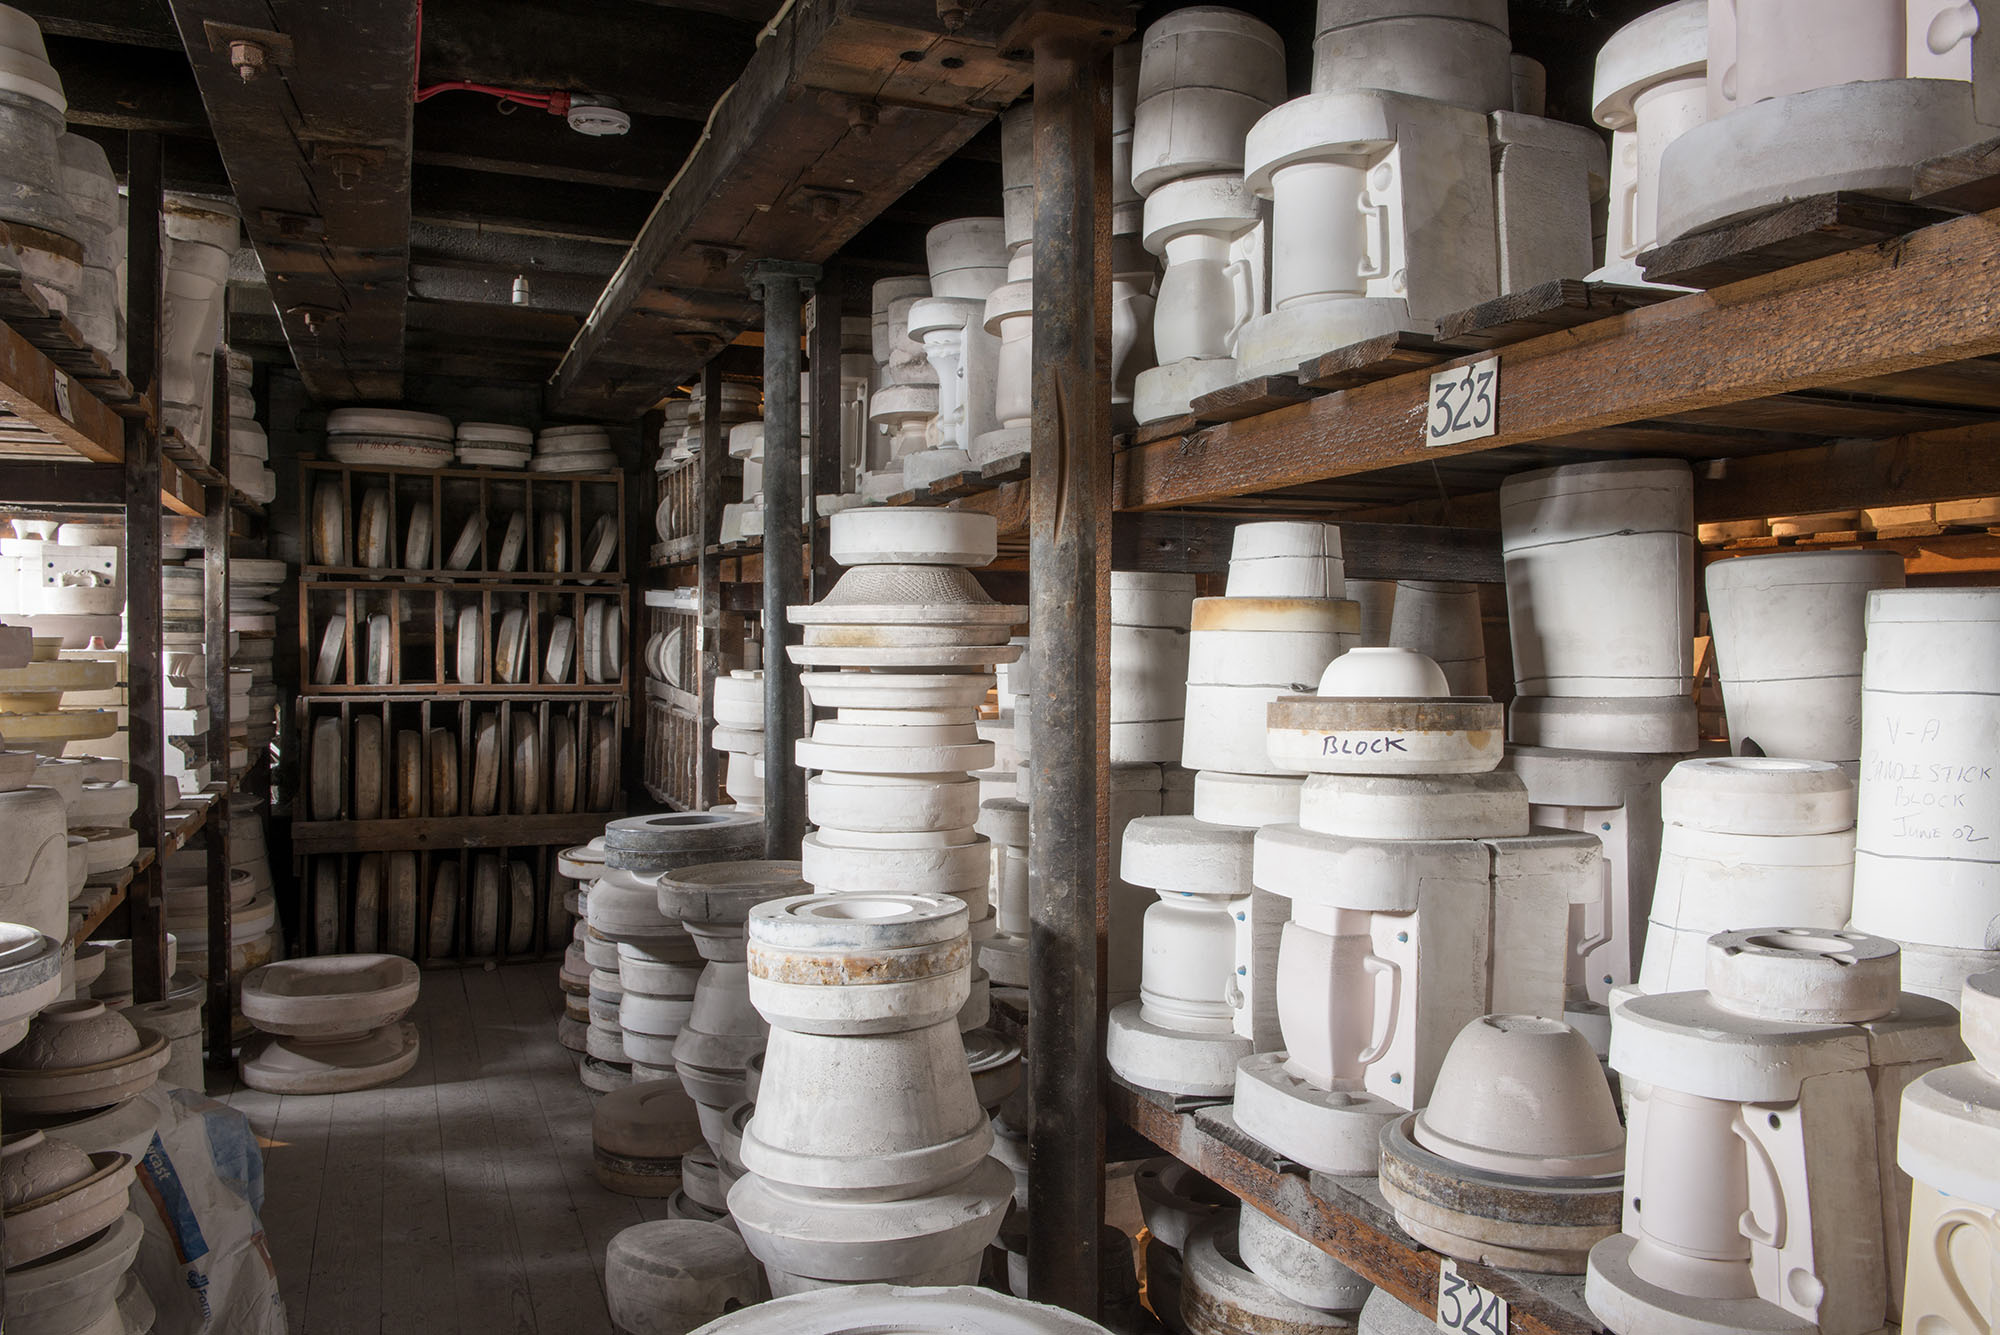 Pottery stacked up on wooden shelves